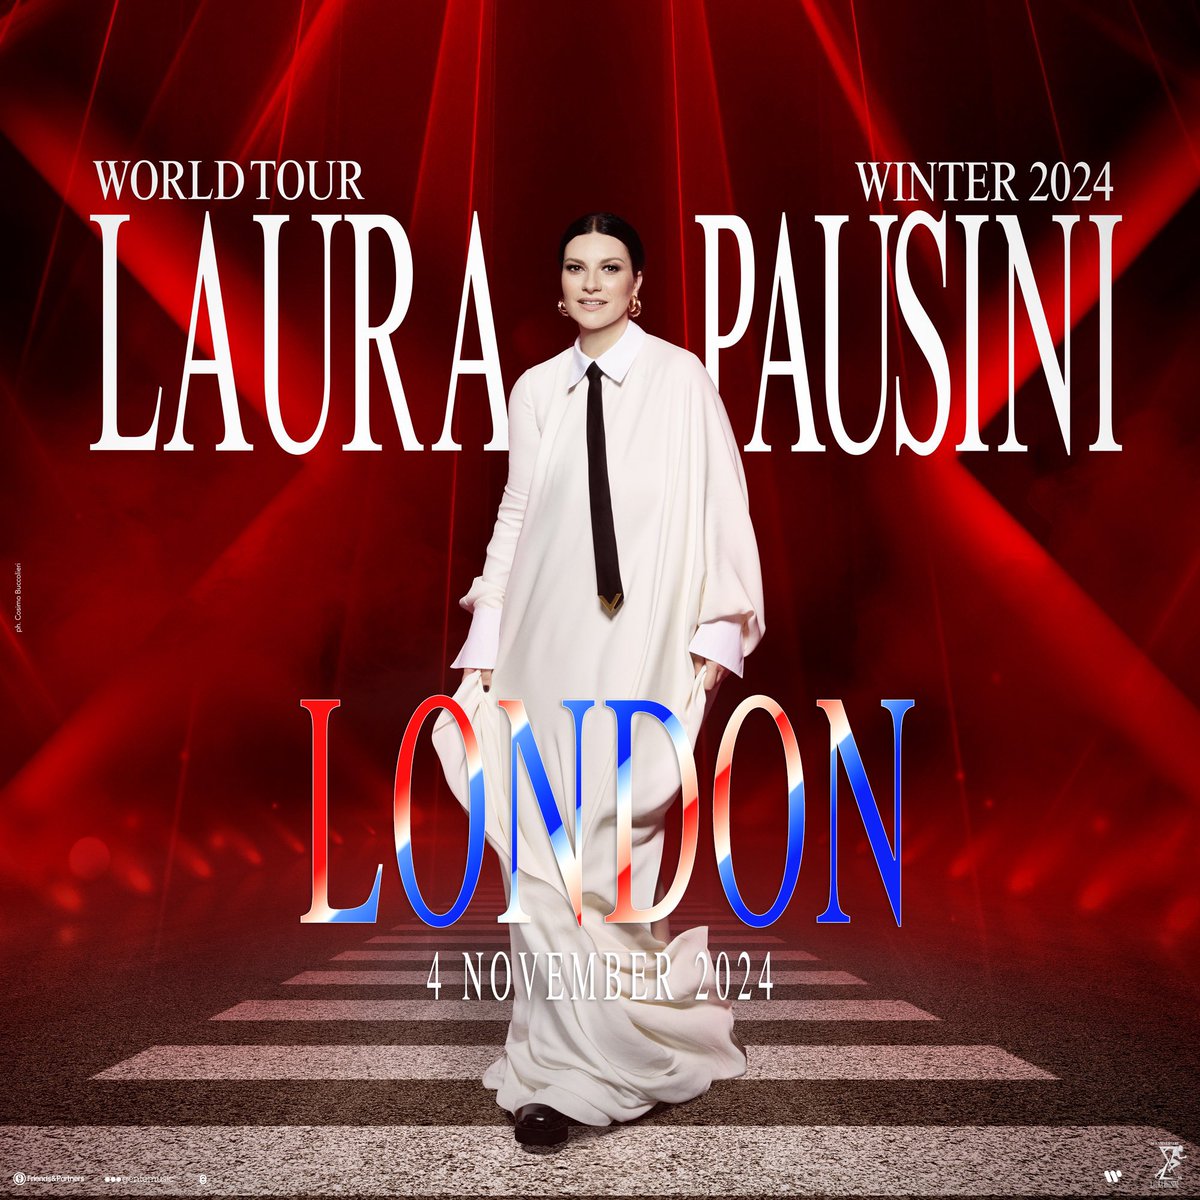 Tickets booked to see @LauraPausini in London 🤩🎉 @AlfPezzella